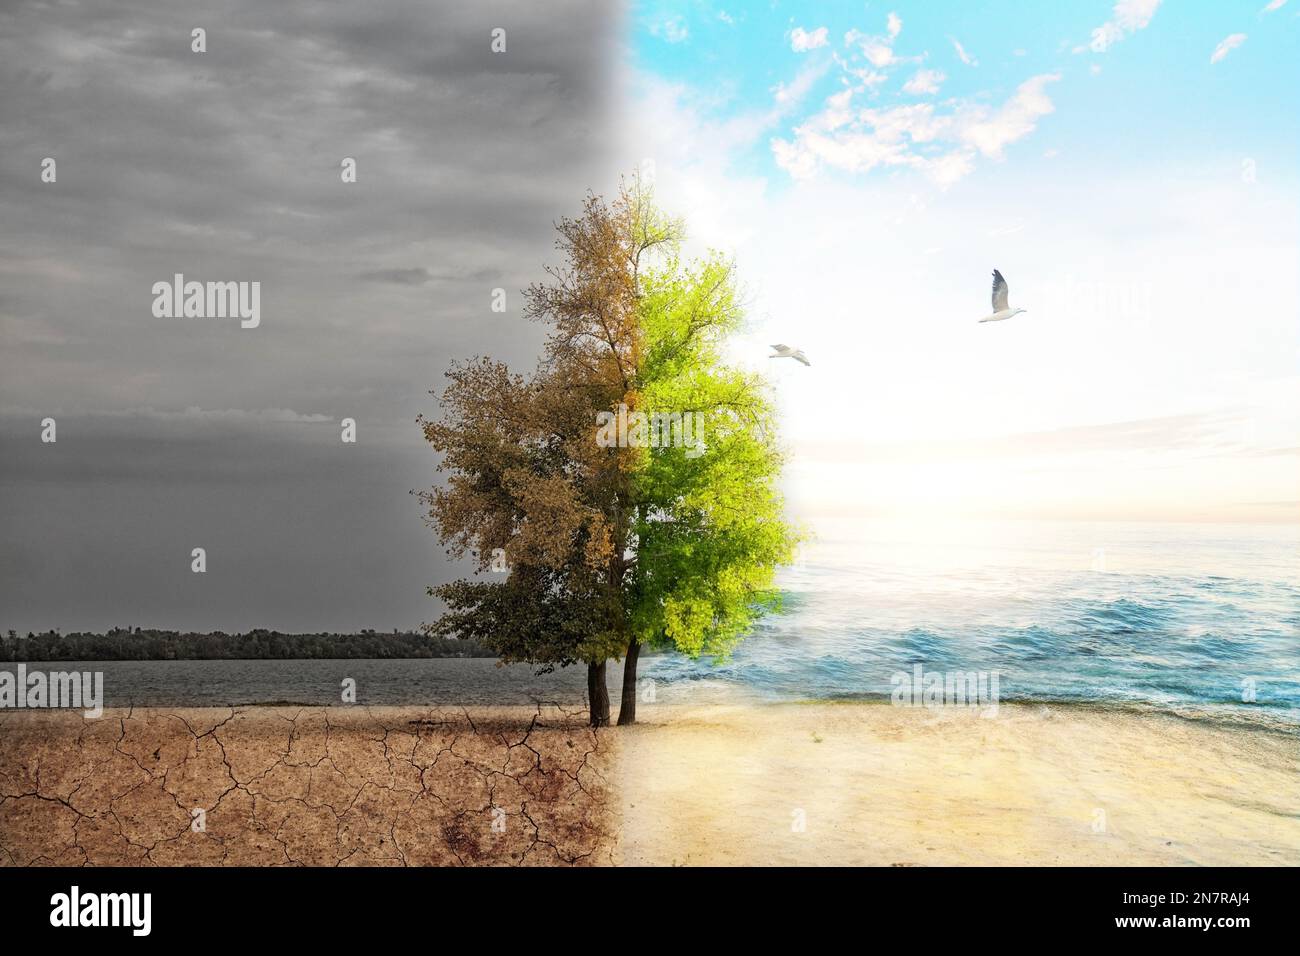 the line between weather and bad weather, the tree is green on one side and dry and gray on the other, climate change Stock Photo